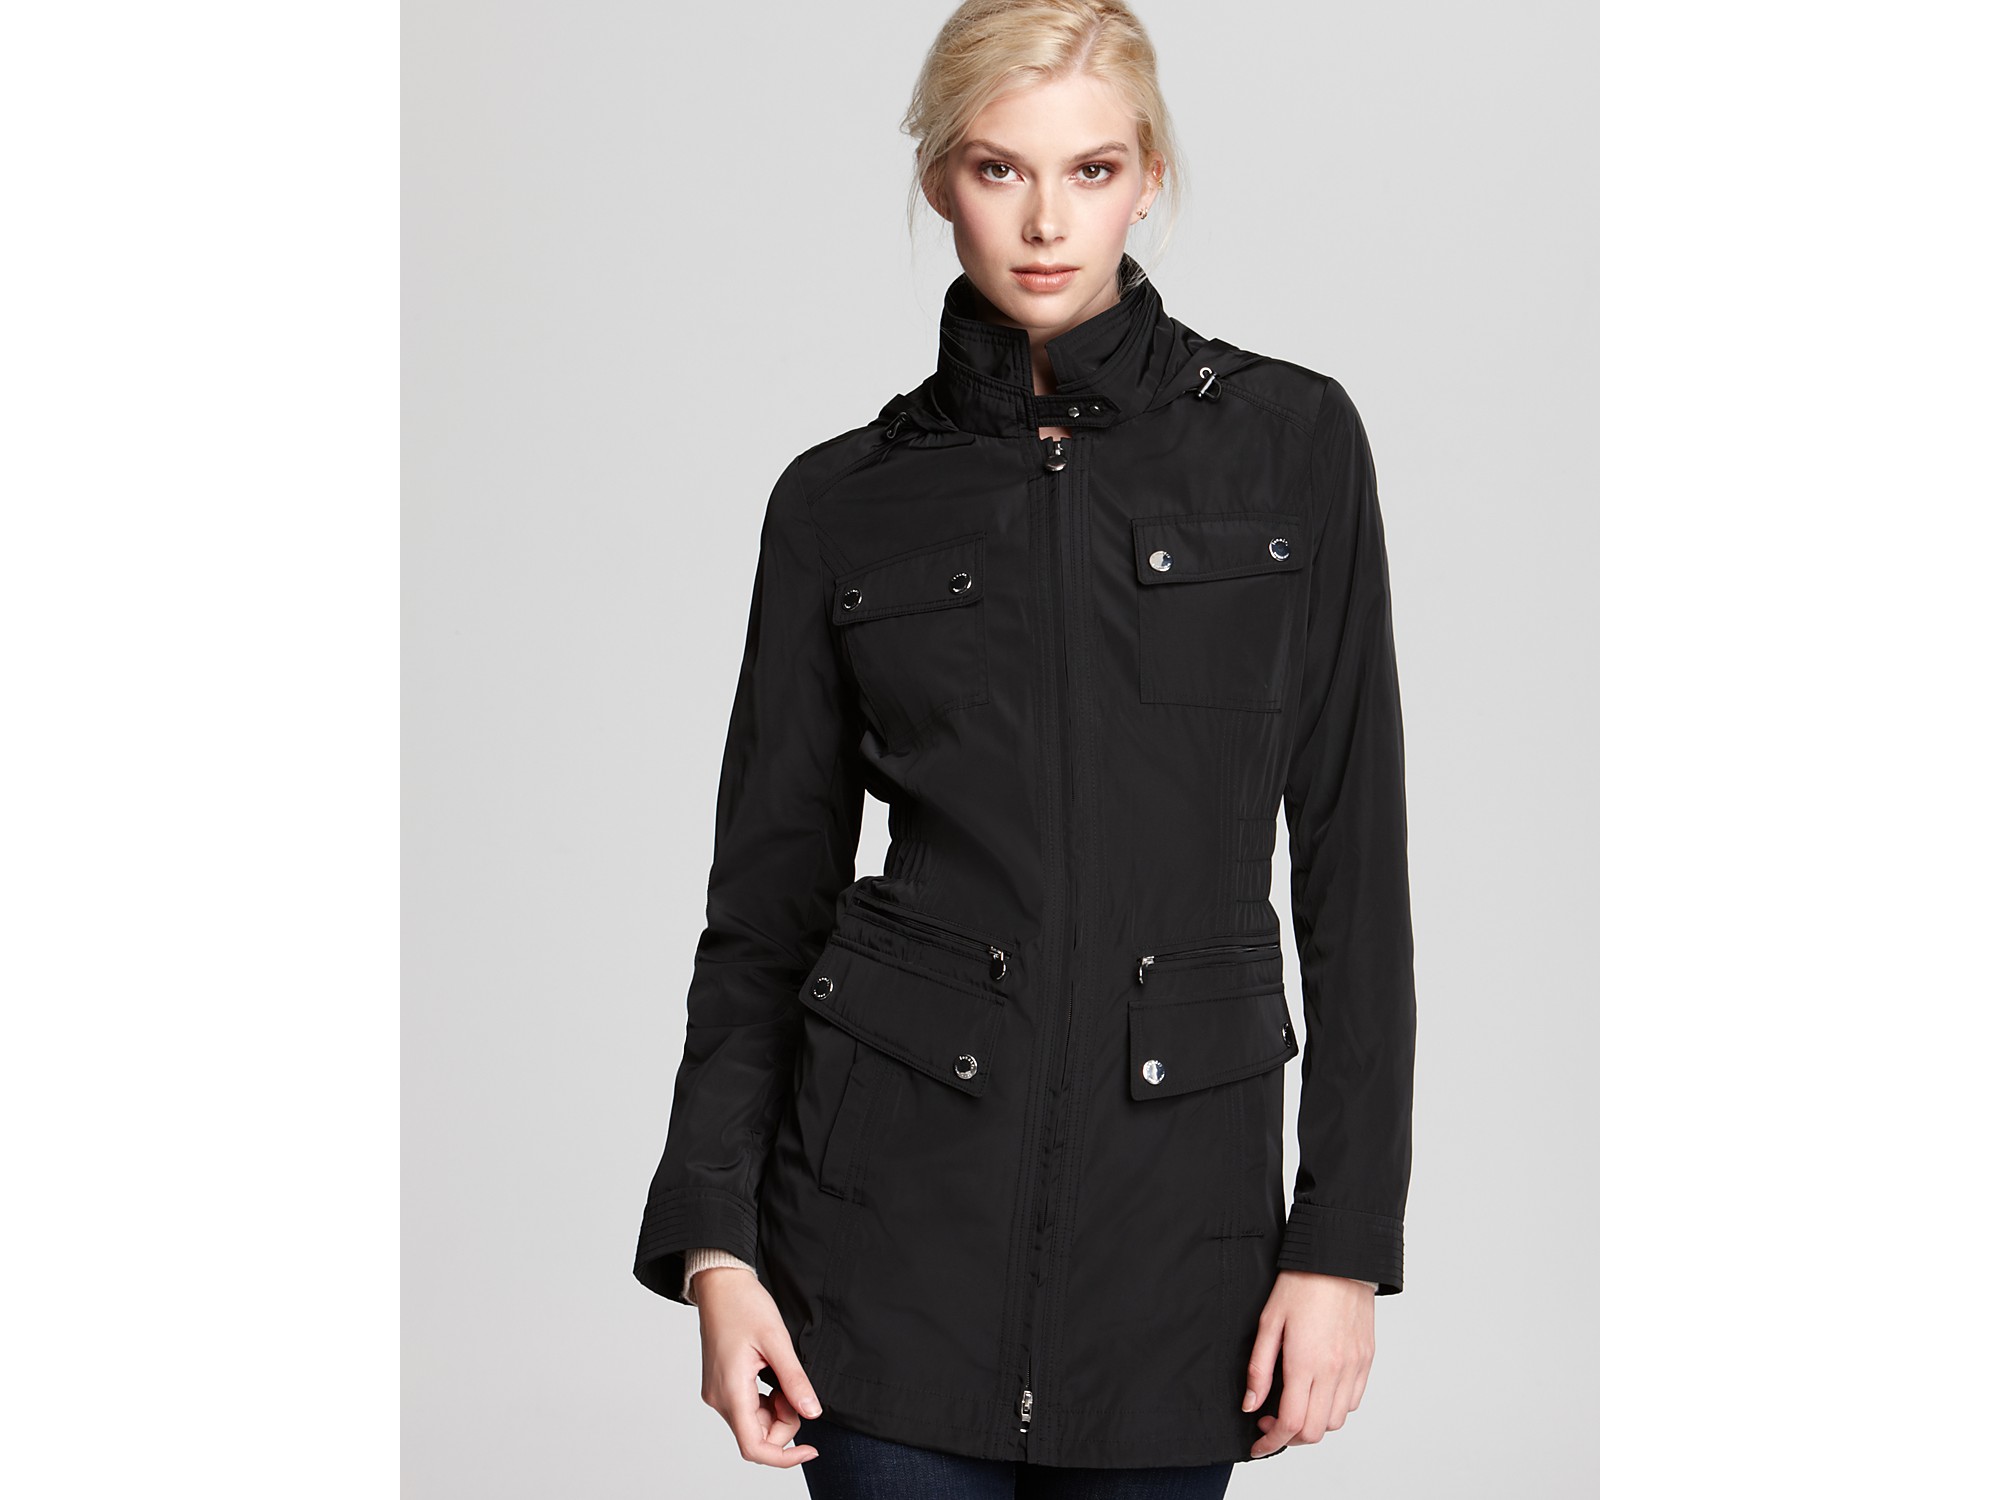 Lyst - Laundry By Shelli Segal Cinched Waist Anorak Raincoat in Black